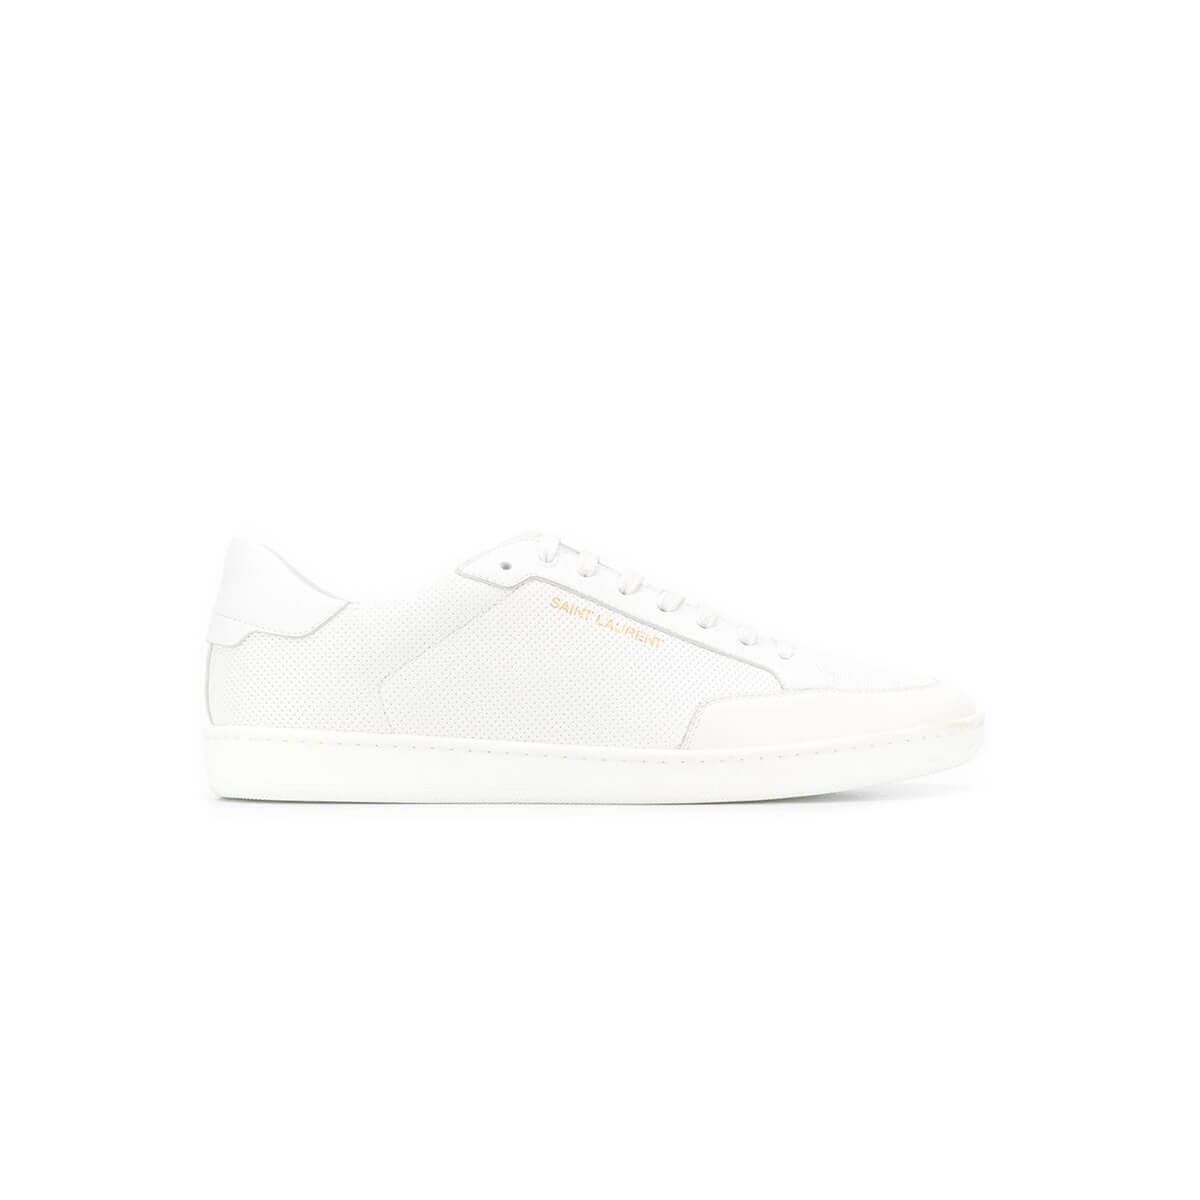 Court Classic SL/10 Perforated Sneakers